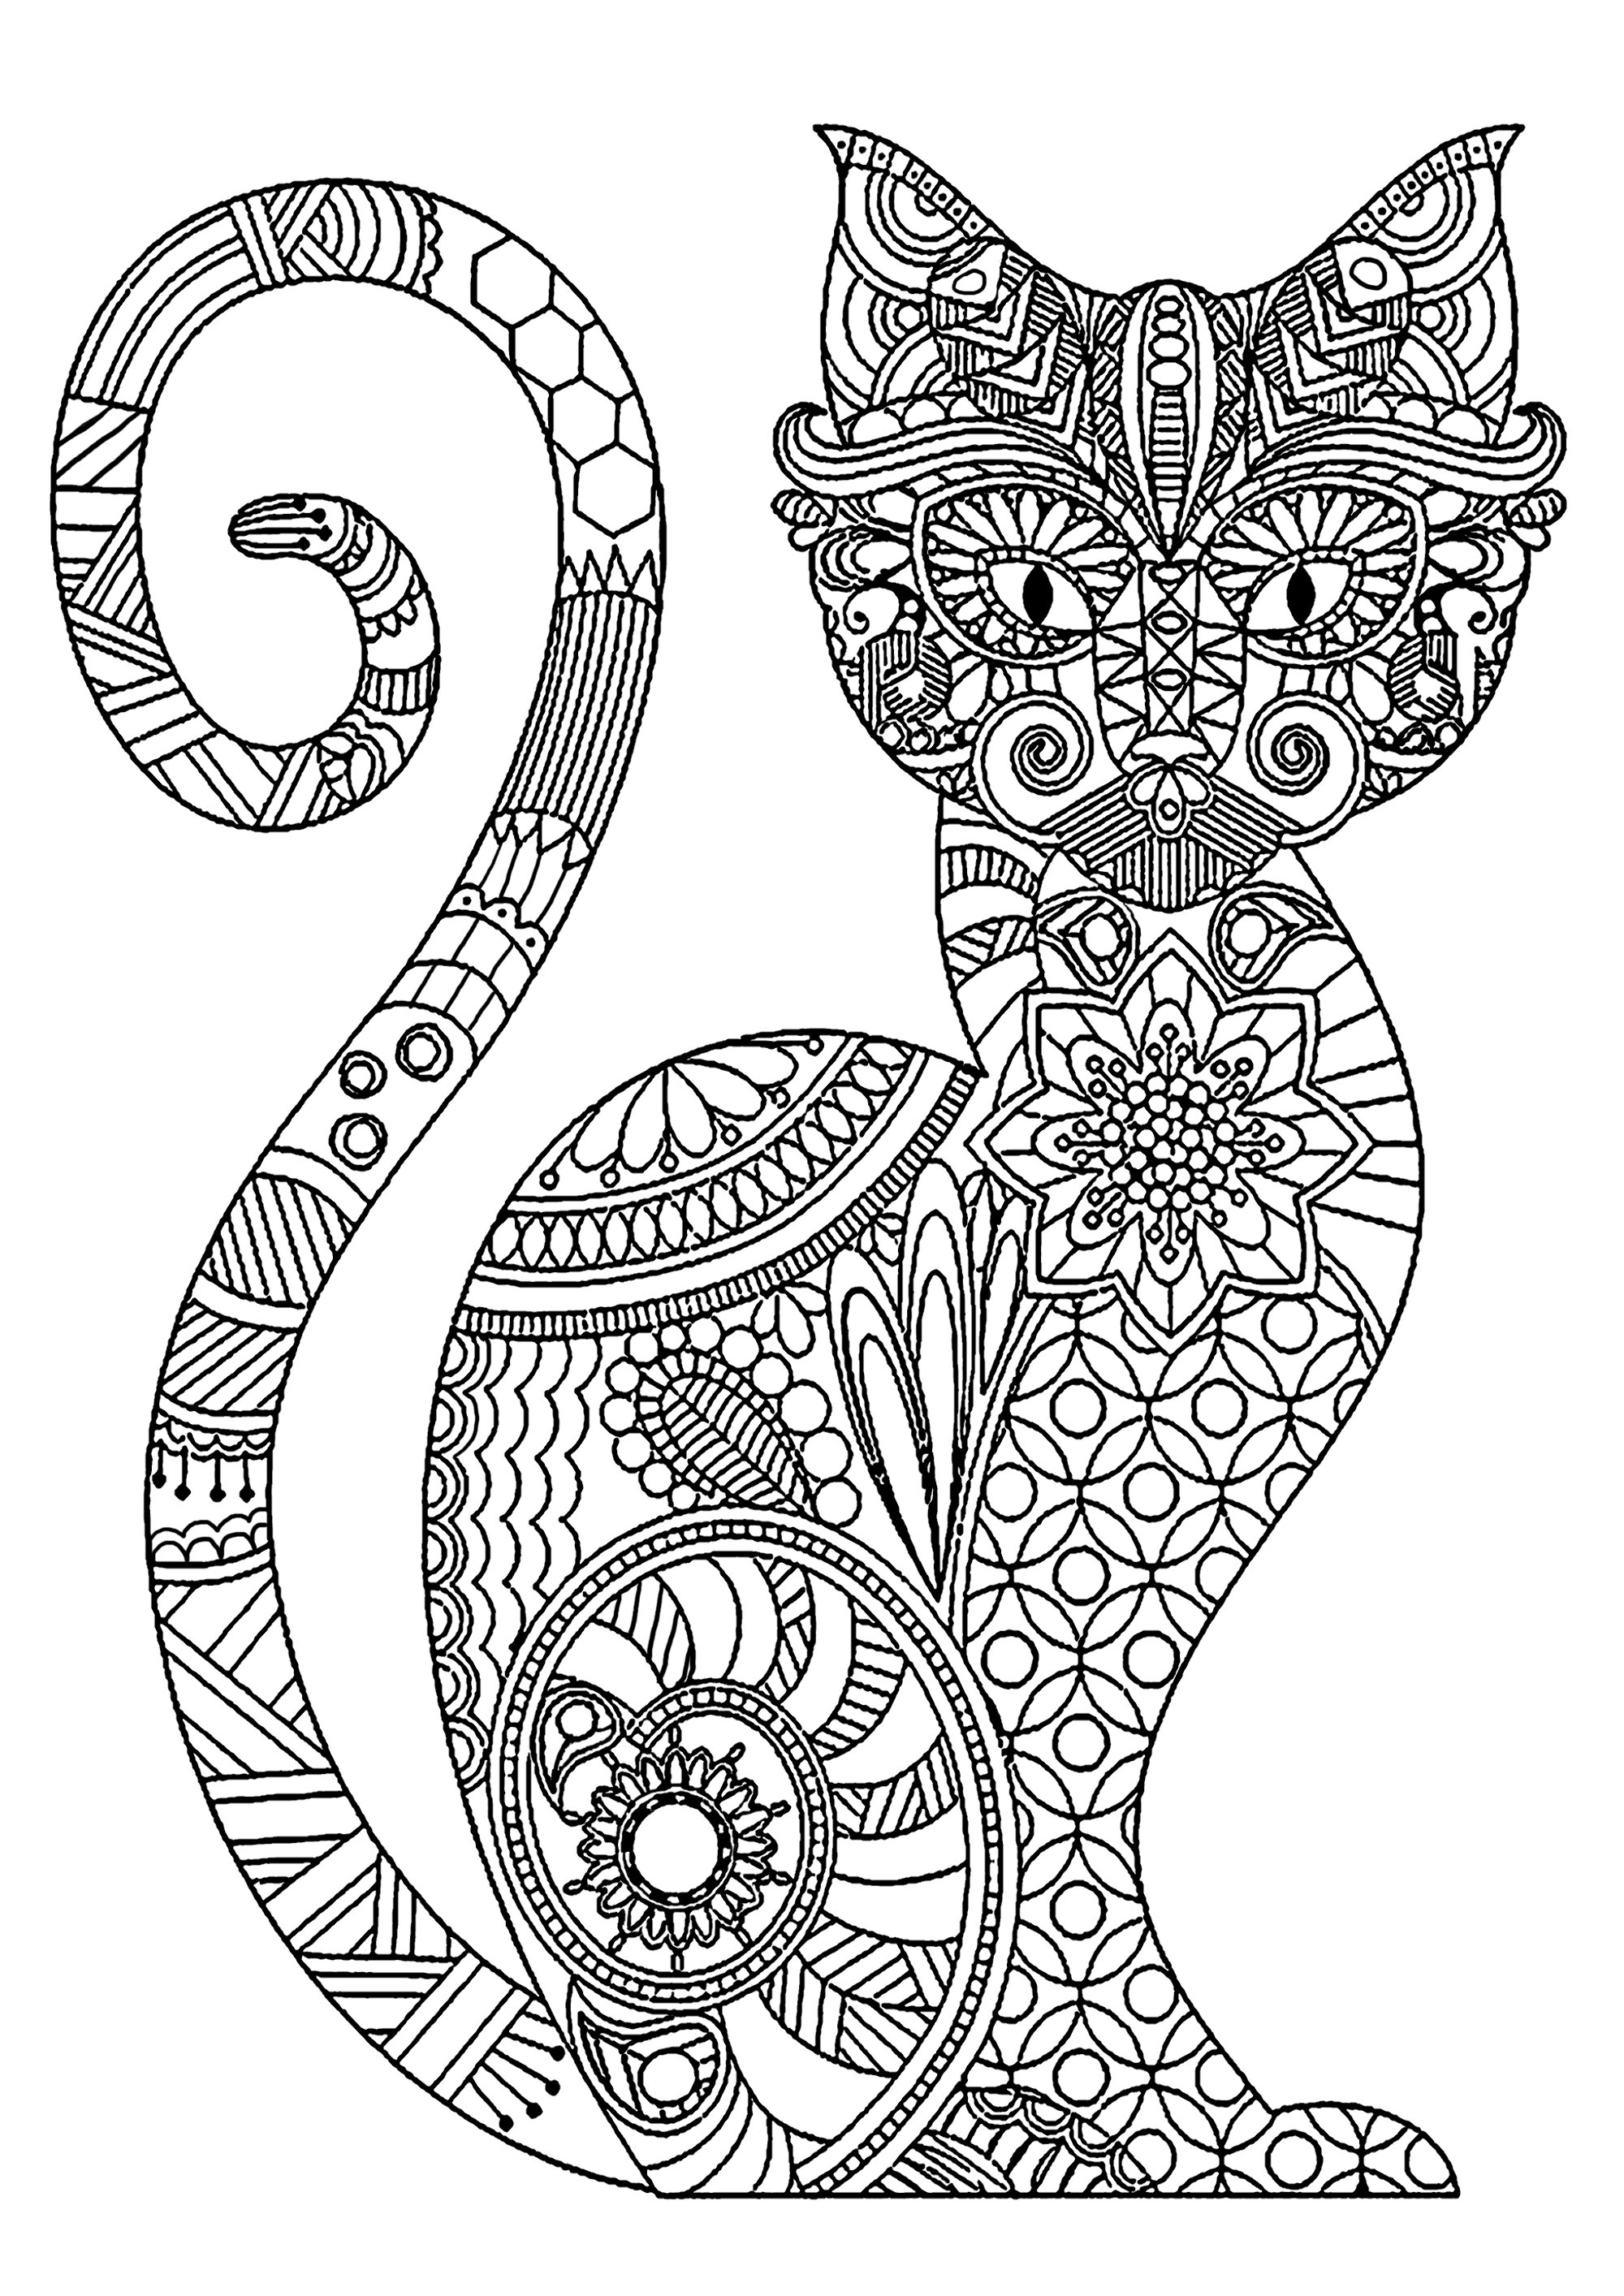 Cat Coloring Pages for Adults - Microsoft Apps